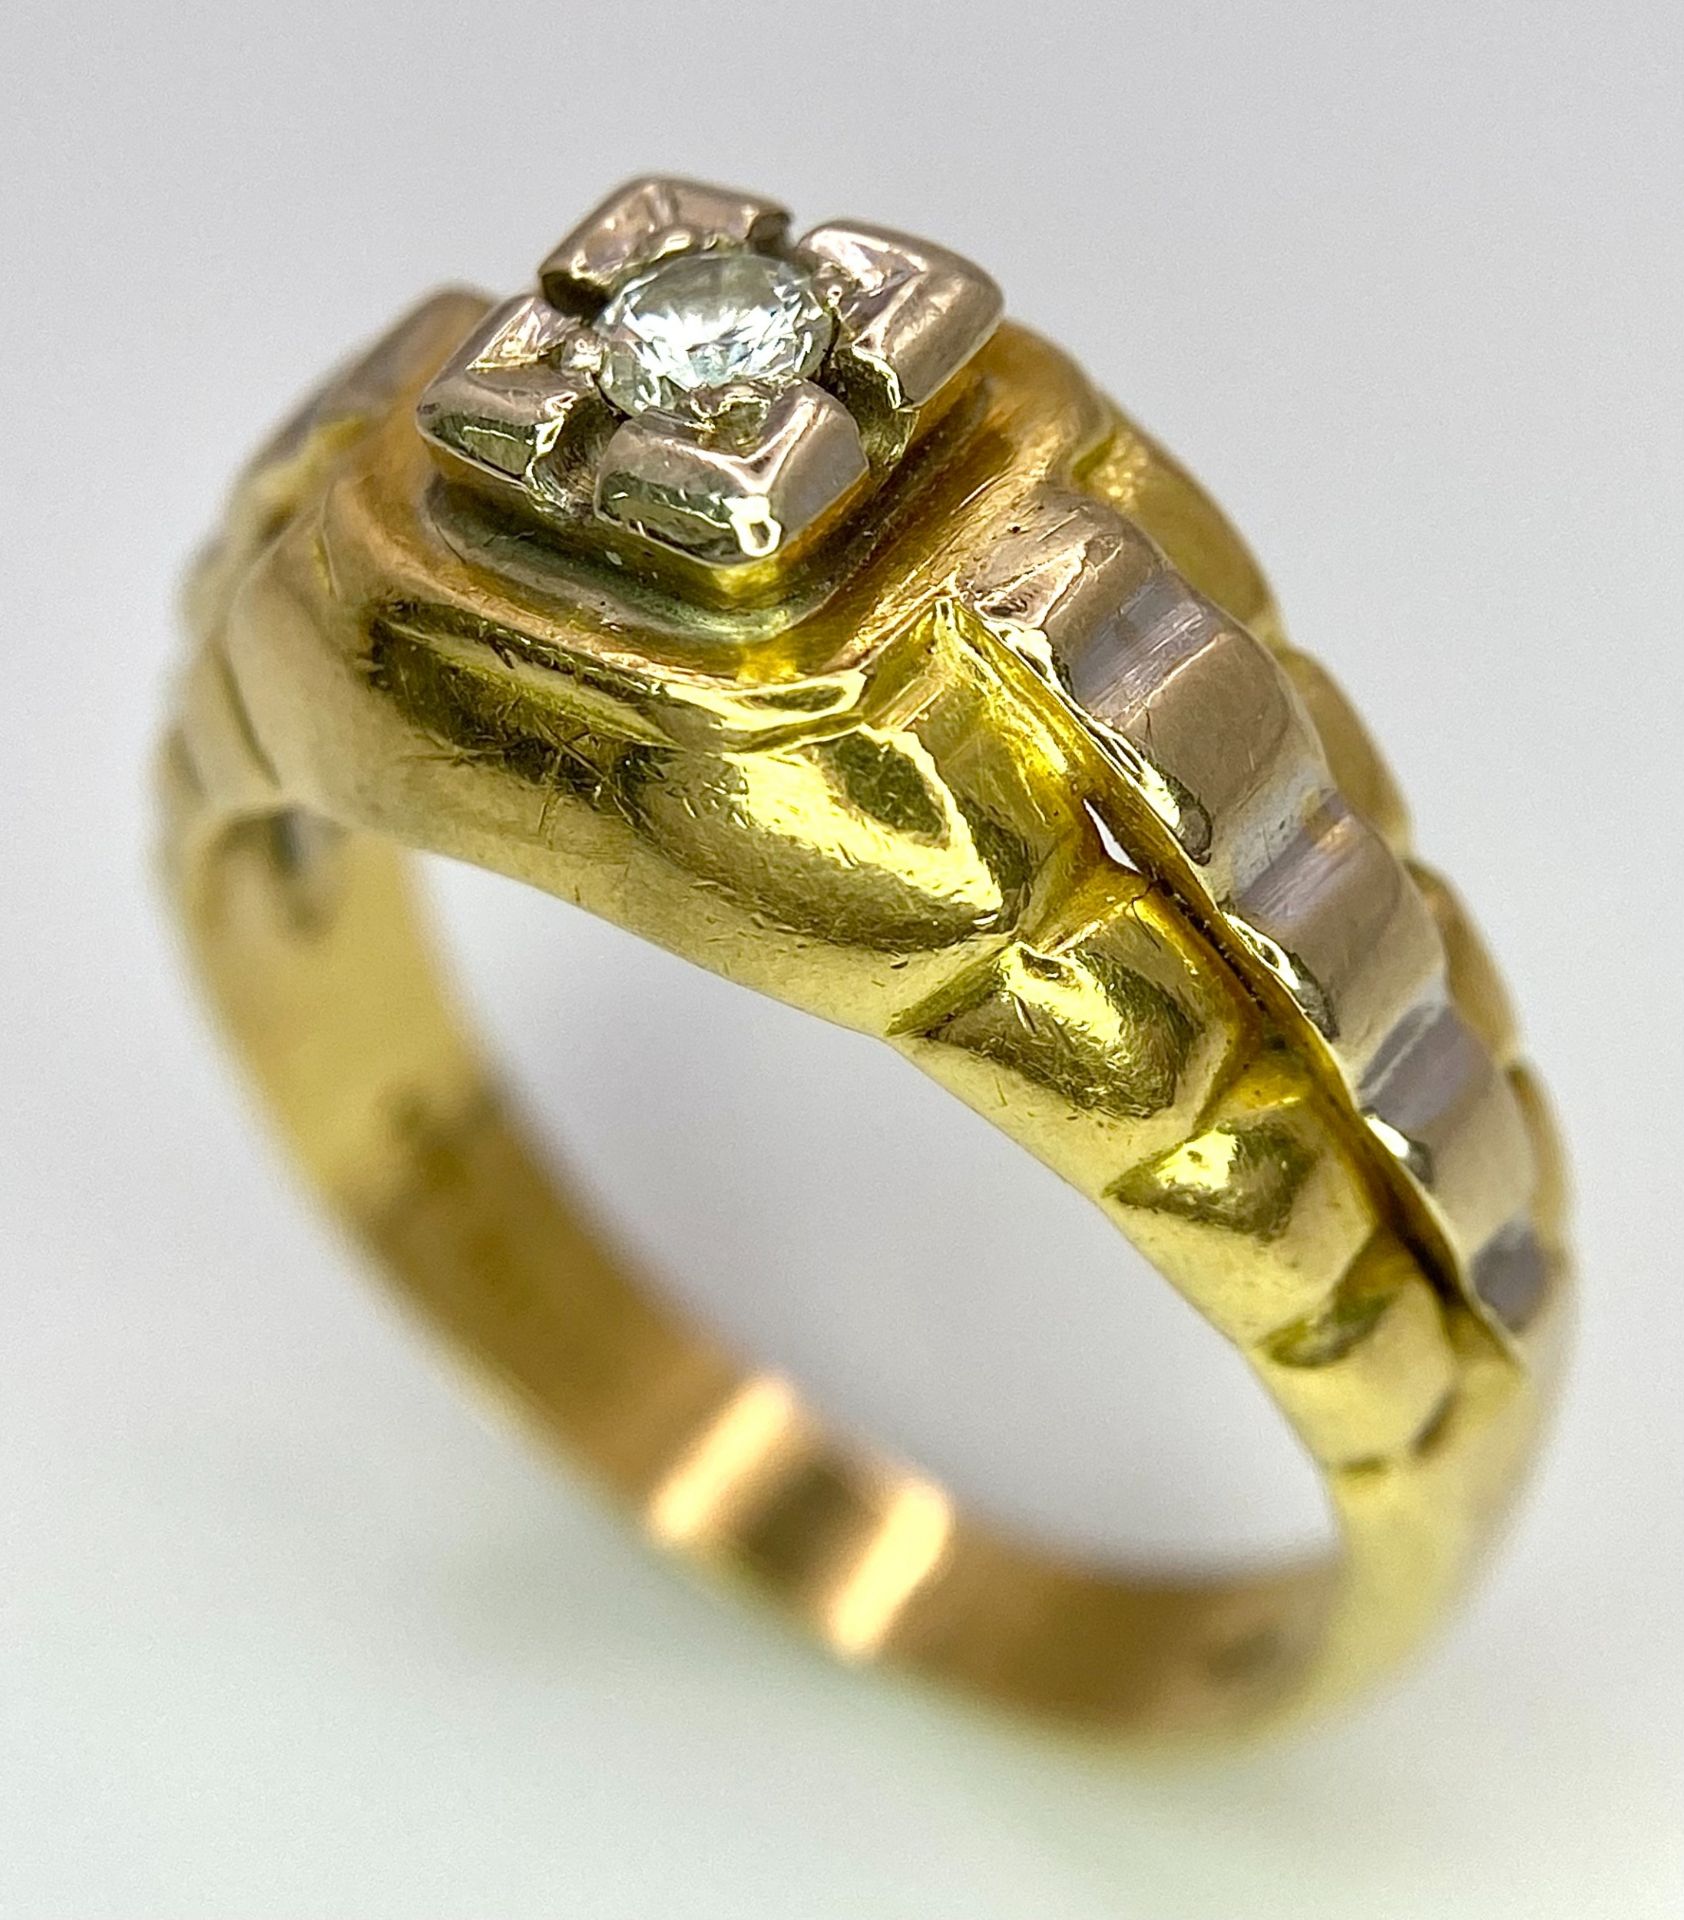 AN 18K TWO COLOUR ROLEX STYLE DIAMOND RING. 6.8G. SIZE P. - Image 5 of 10